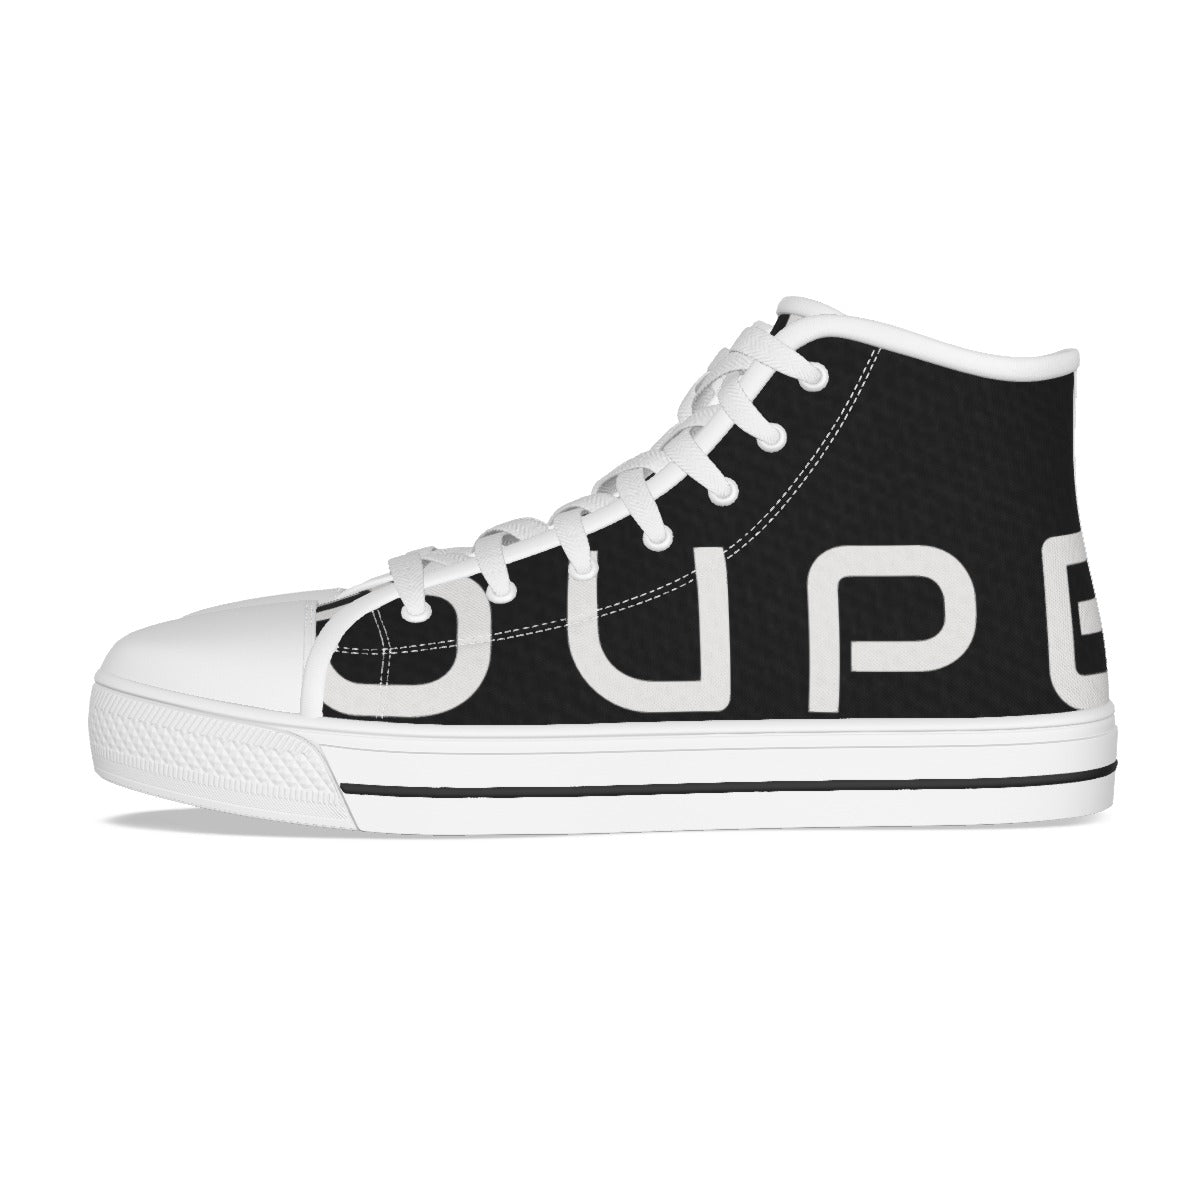 OUPE B/W Men's Canvas Shoes Large writing